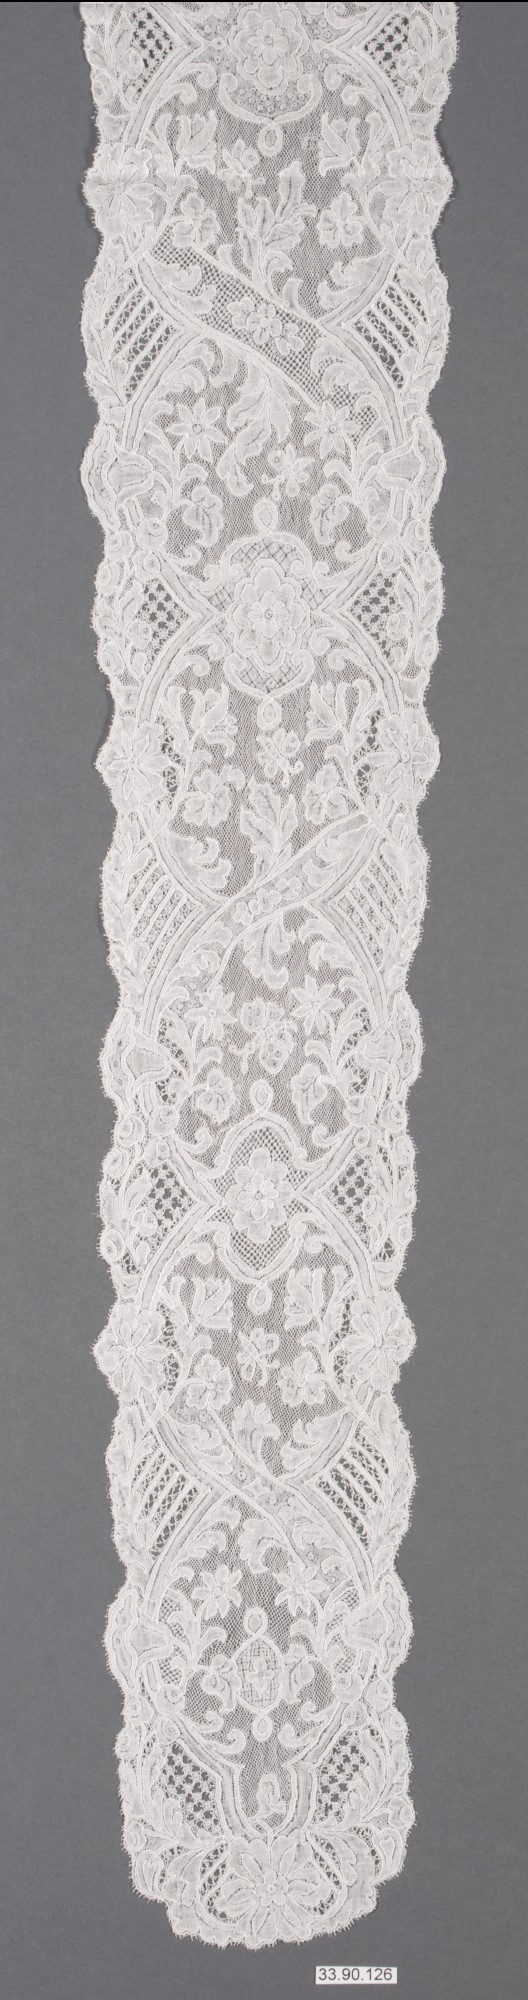 Pair of joined lappets | Flemish | The Metropolitan Museum of Art